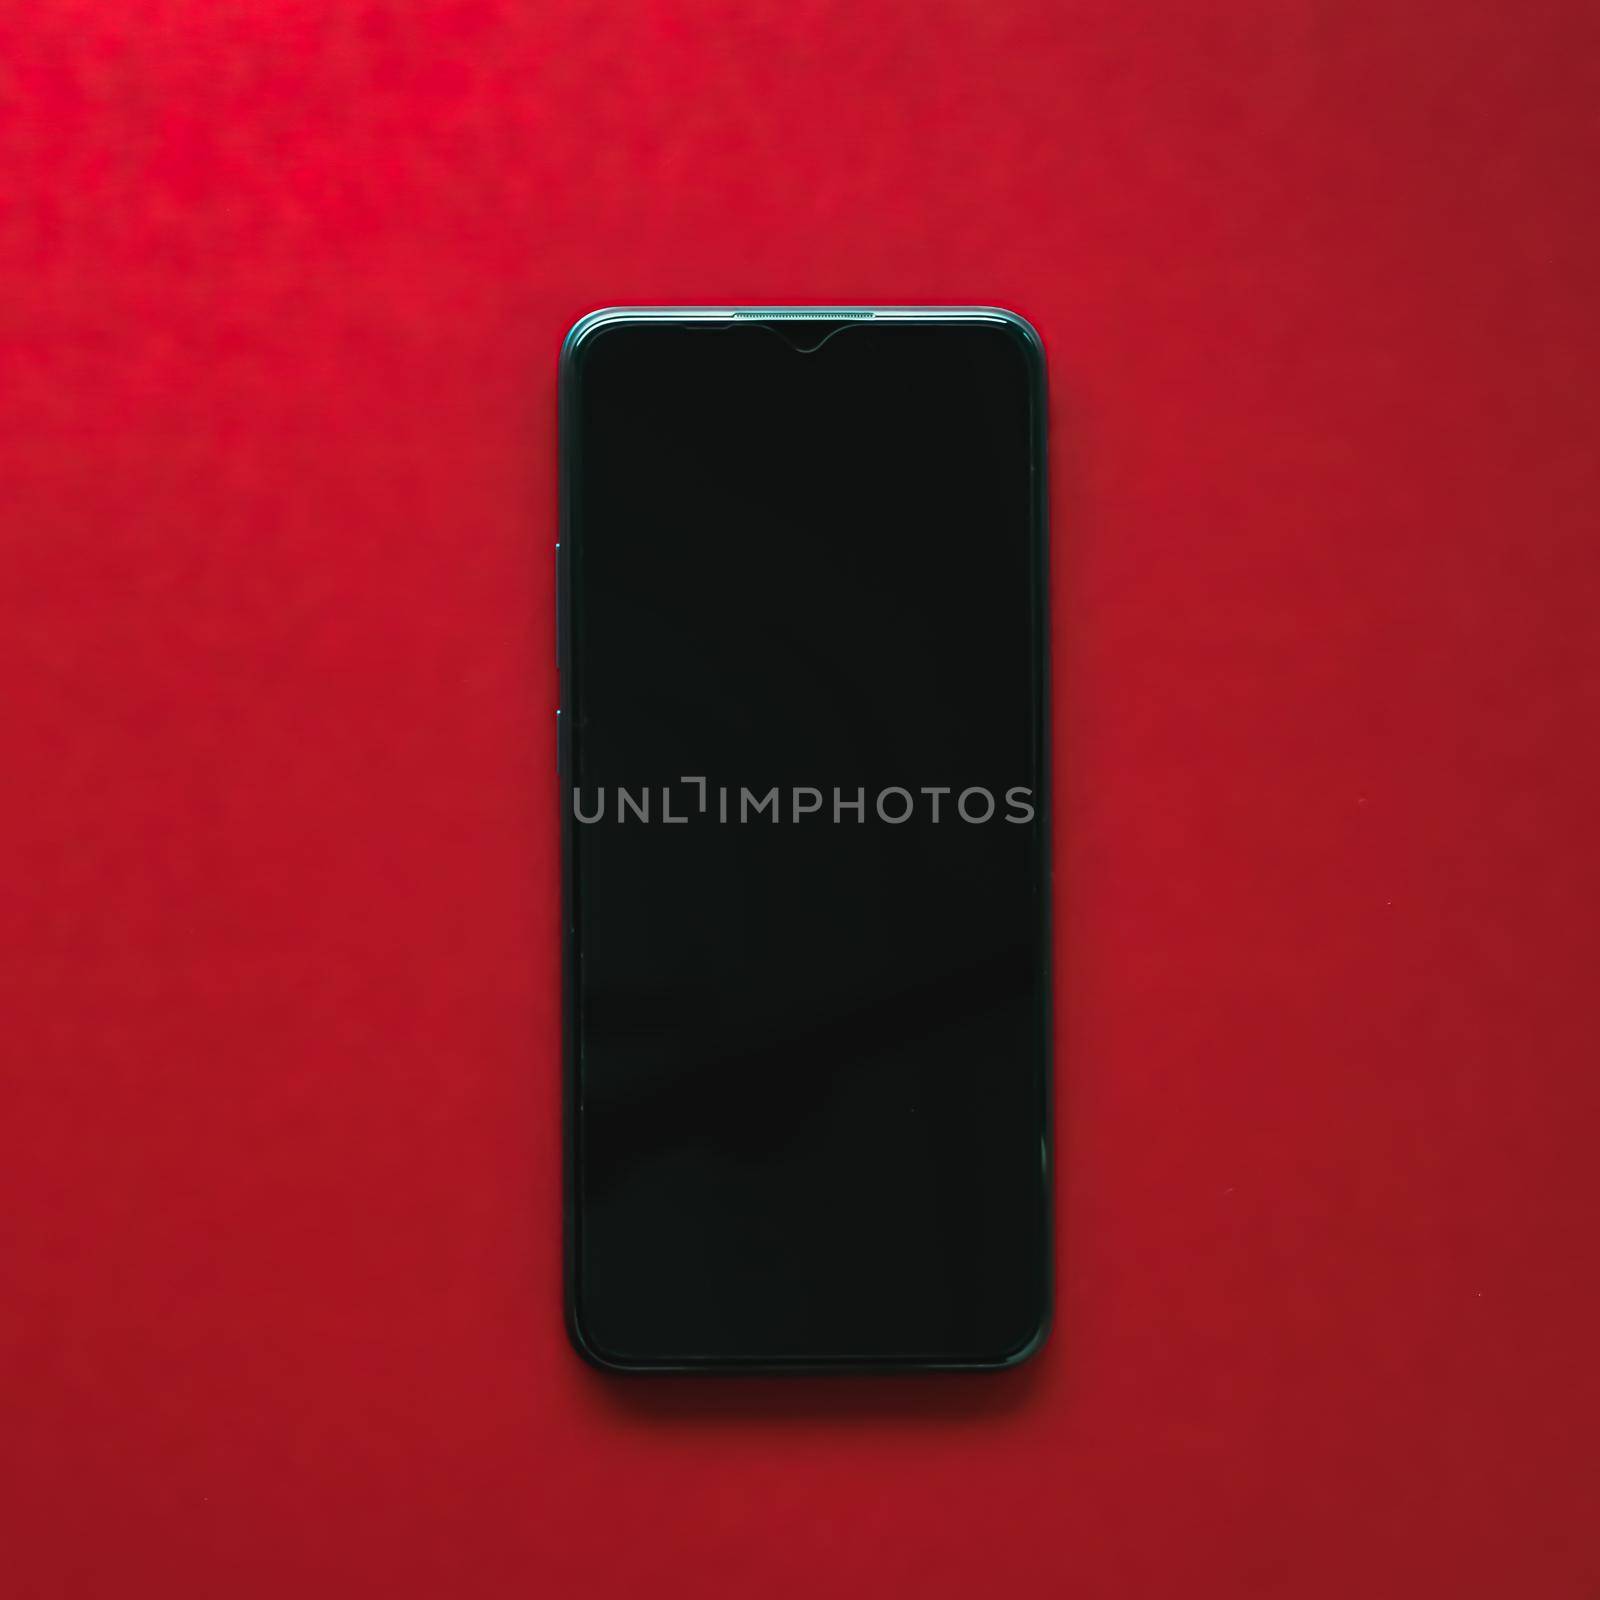 Mobile app design or smartphone screen flatlay concept. Mobile phone as new model presentation mockup or application template, brand marketing design on red background as flat lay.